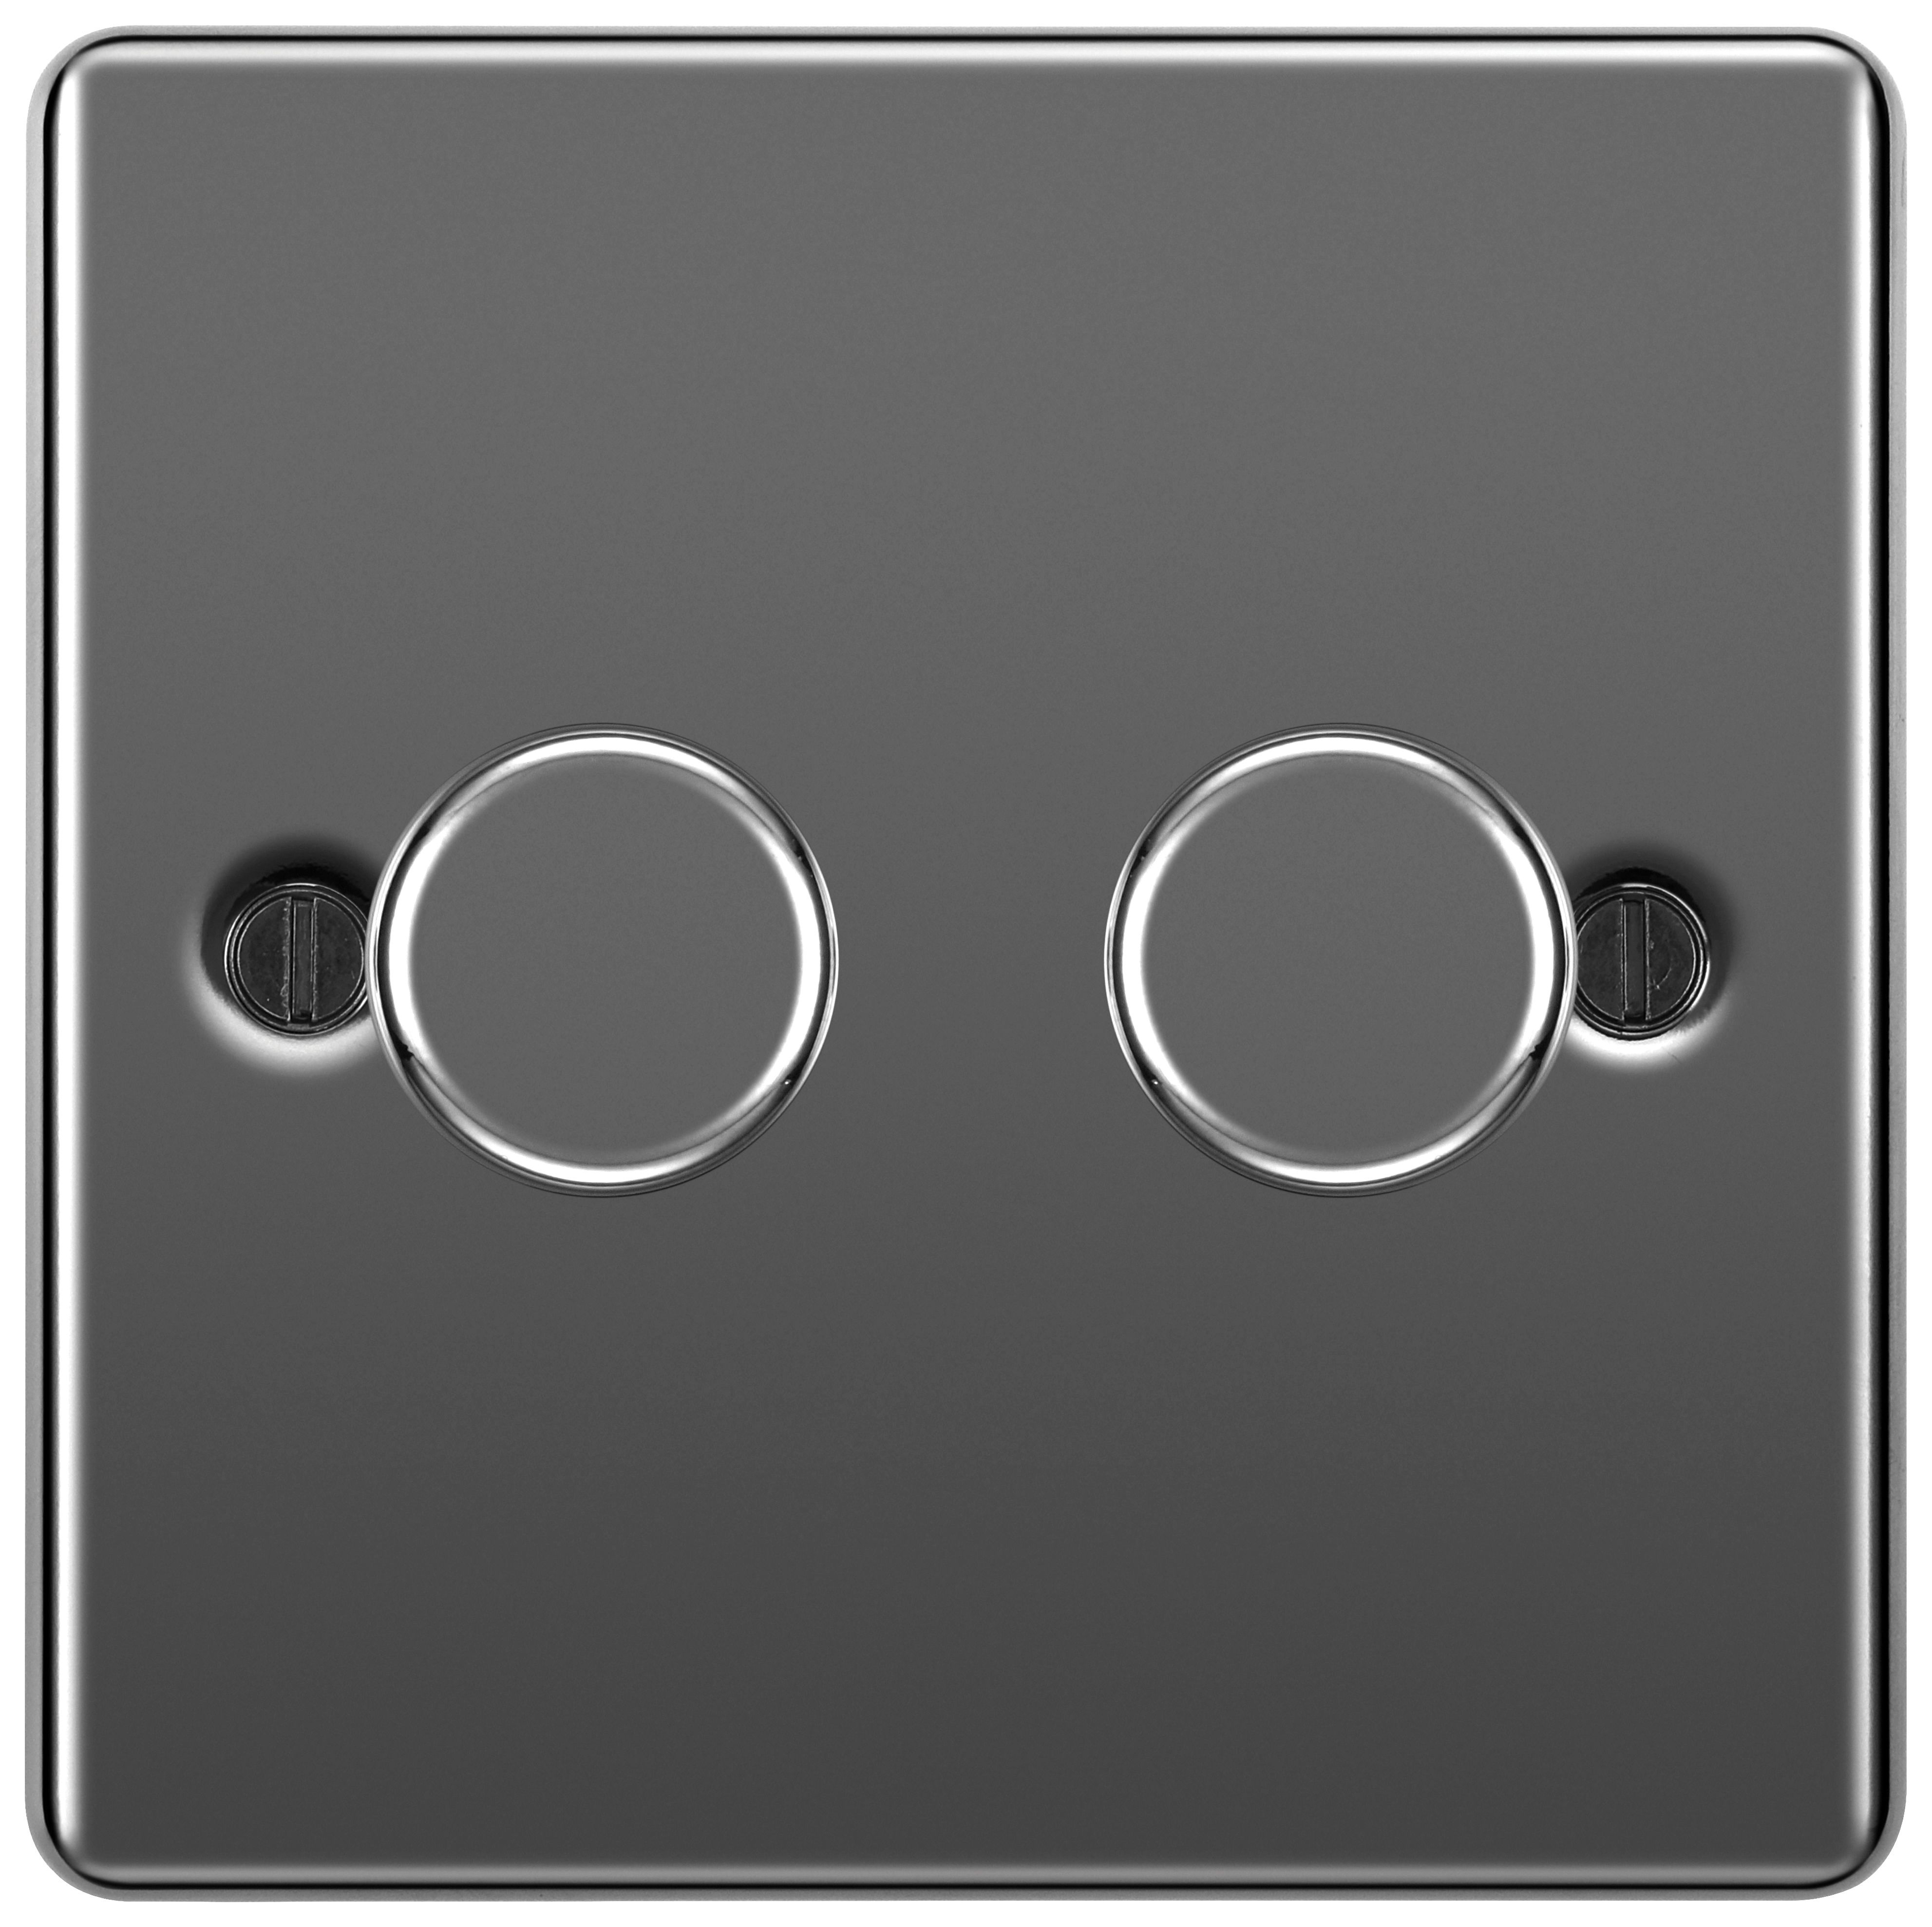 Image of BG 400W Screwed Raised Plate Double Dimmer Switch 2-Way Push On/Off - Black Nickel